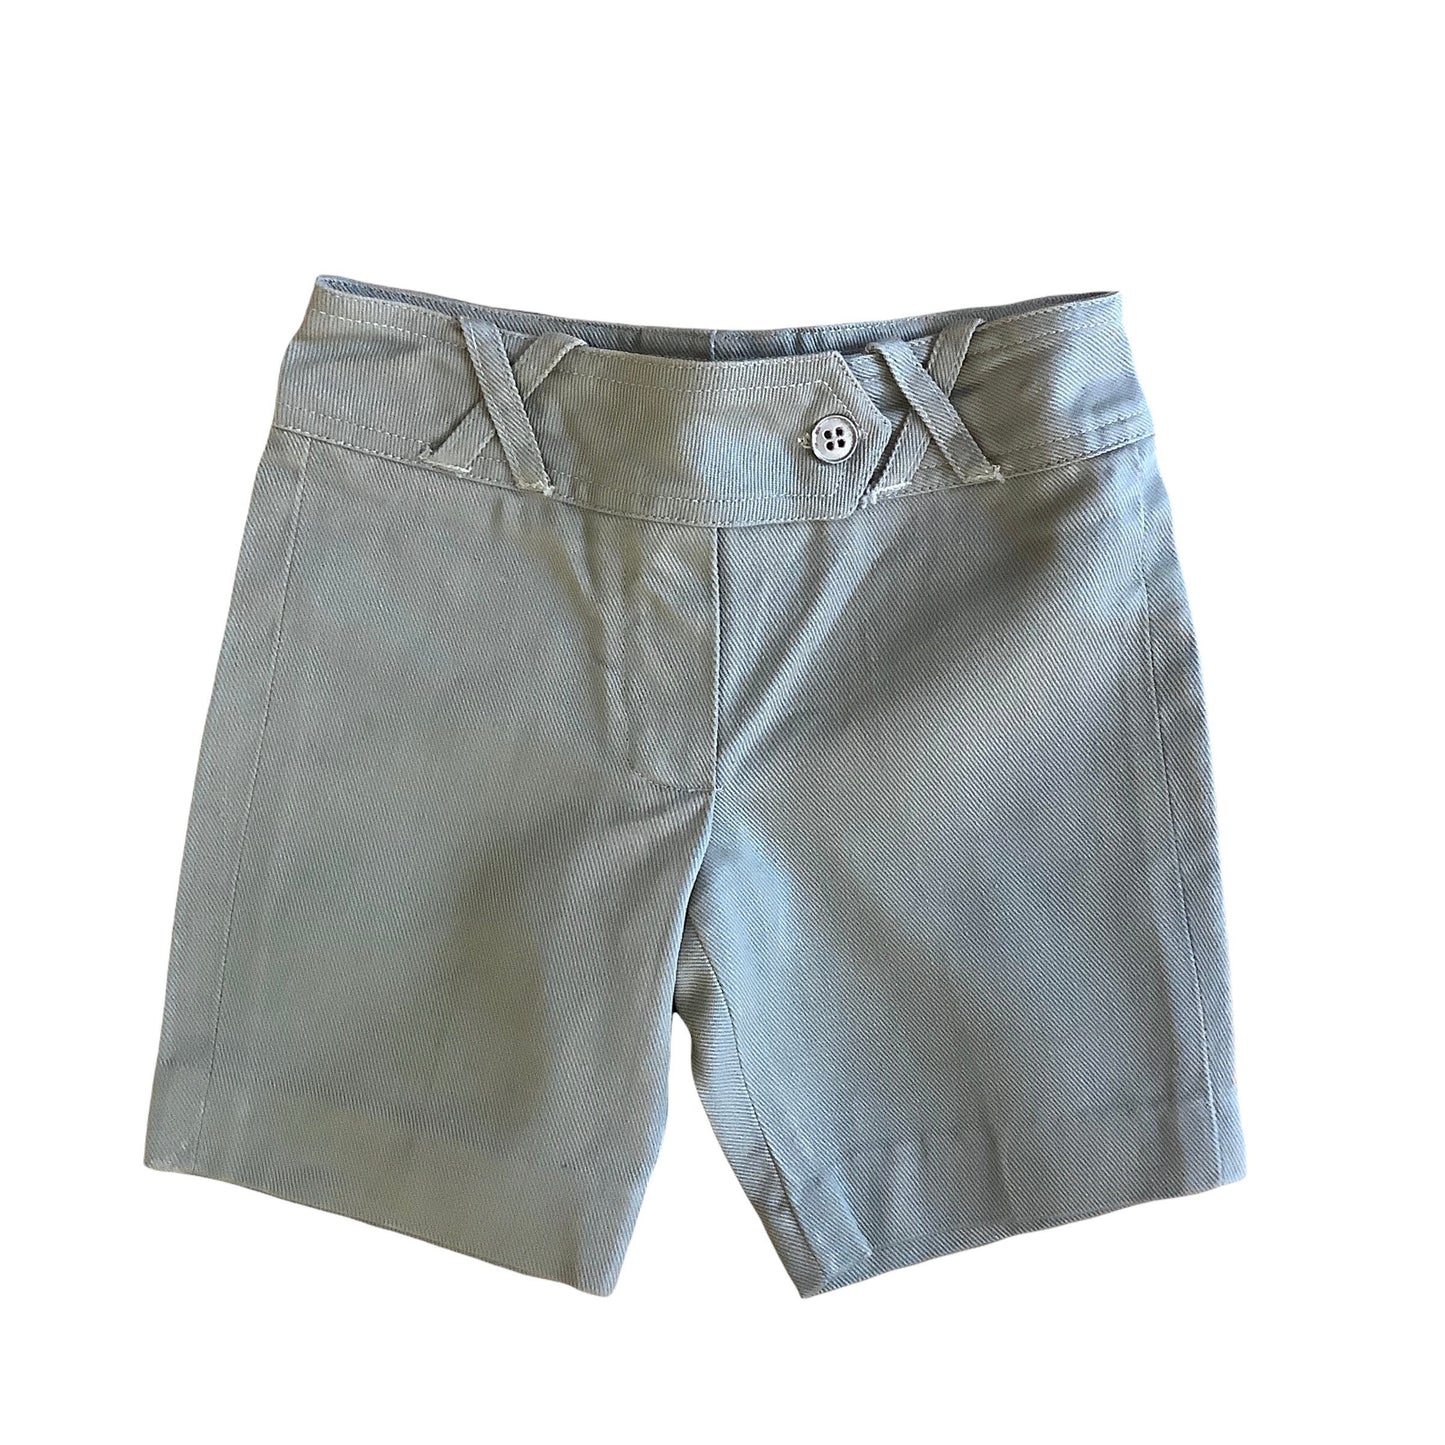 Vintage 60s Grey Shorts French Made  18-24 Months